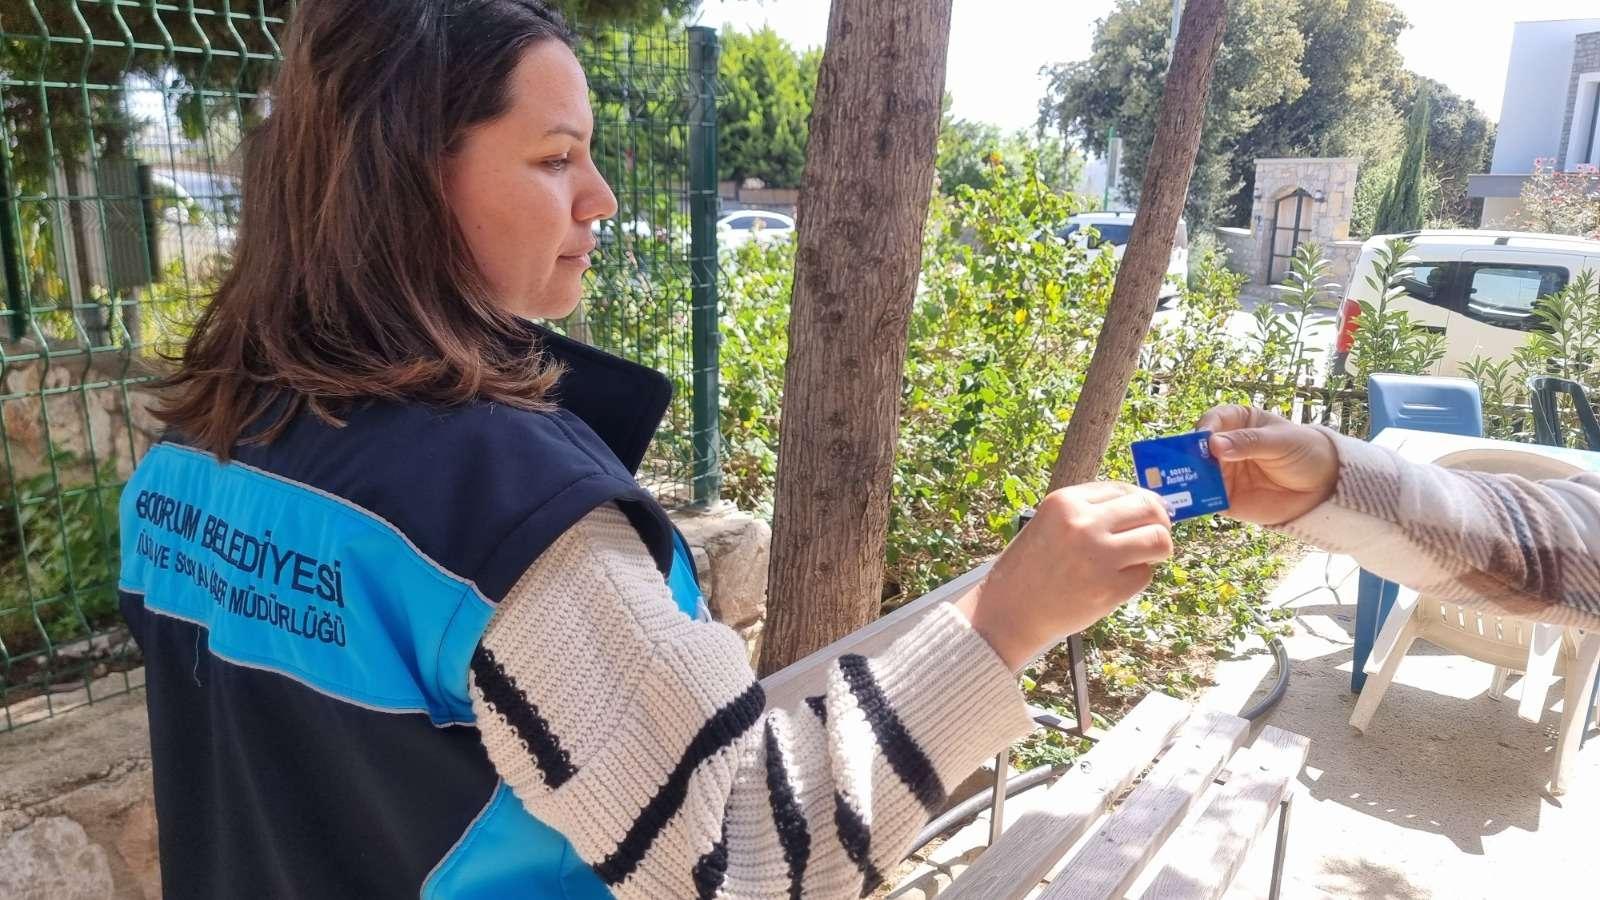 COMMUNITY AID IN ACTION: BODRUM MUNICIPALITY ROLLS OUT SOCIAL SUPPORT CARDS TO 5,350 FAMILIES